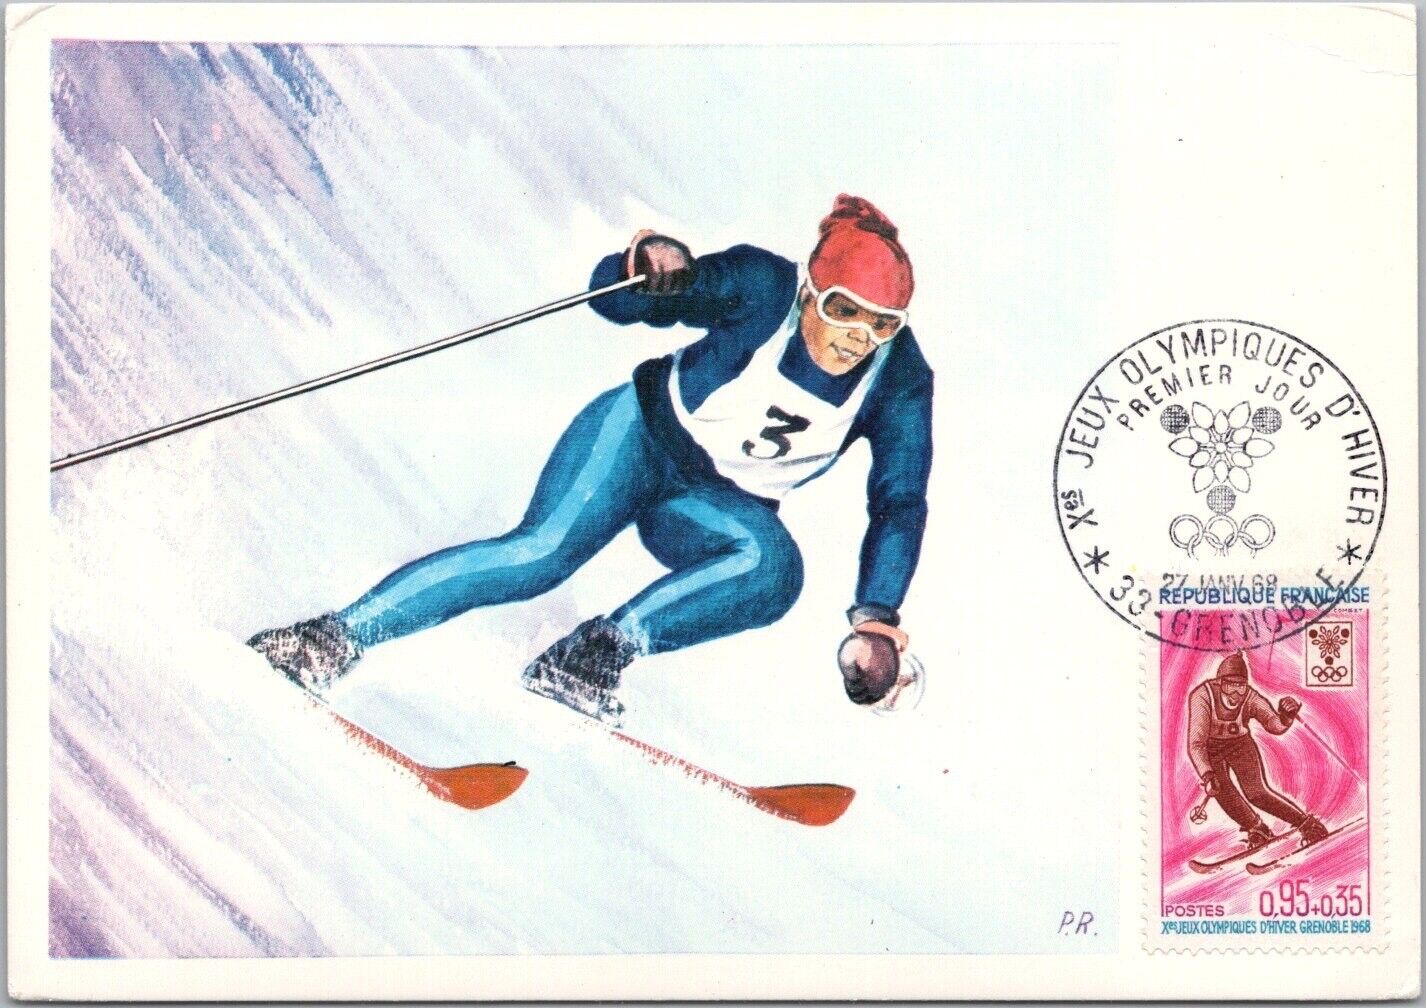 1968 WINTER OLYMPICS Grenoble France Postcard / First Day Cover / Stamp & Cancel